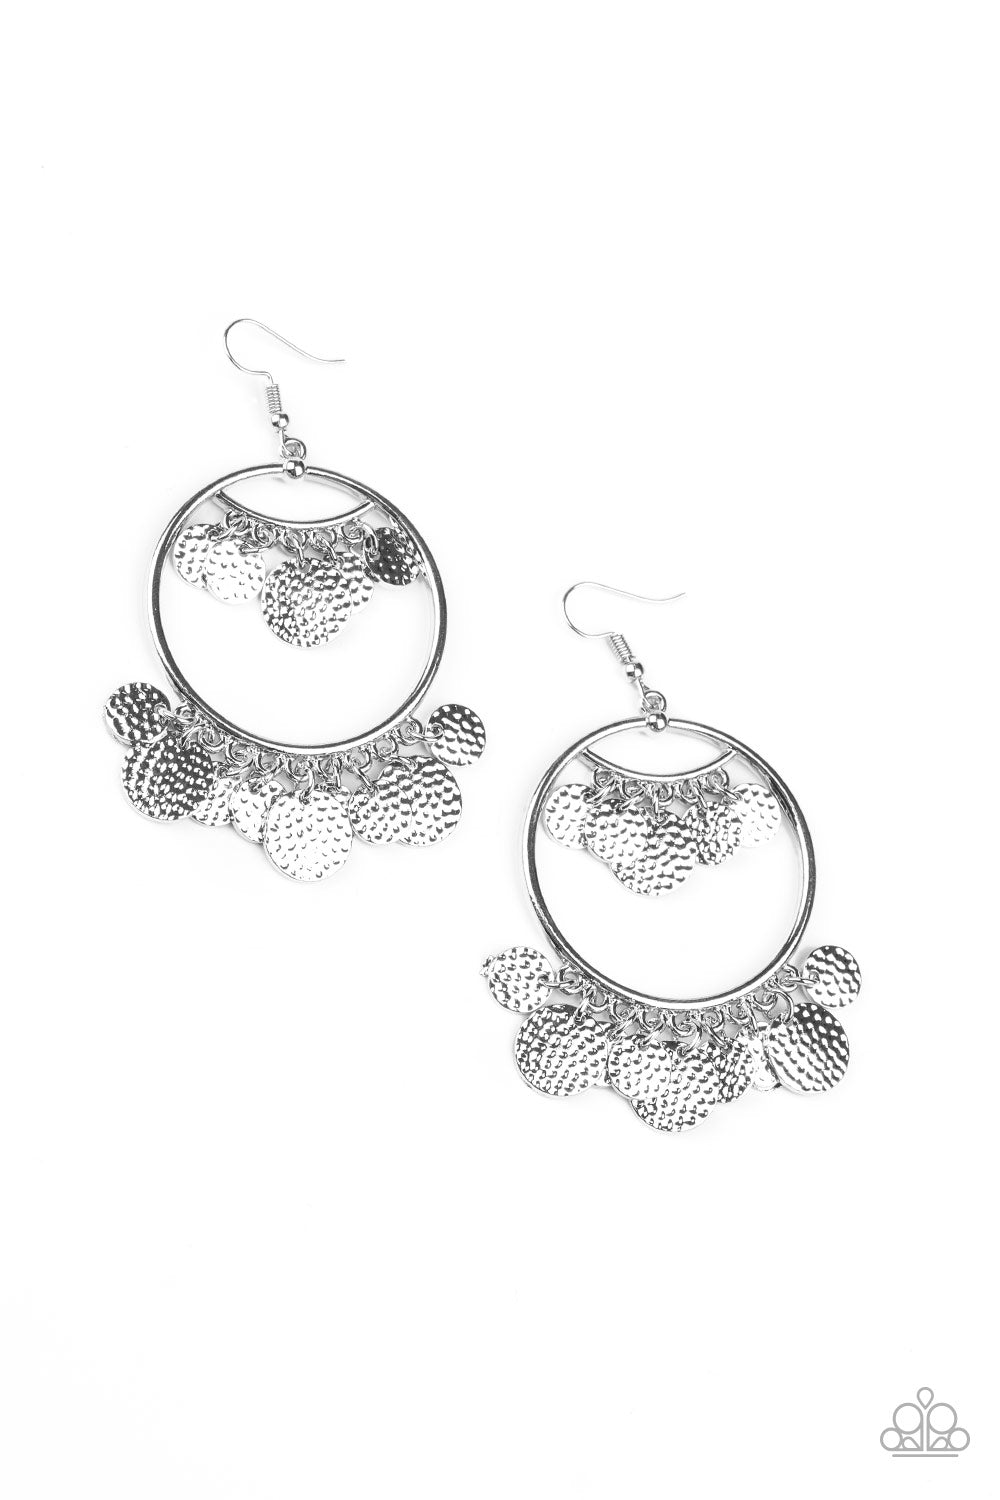 ALL-CHIME HIGH - SILVER COIN CHIME FRINGE EARRINGS